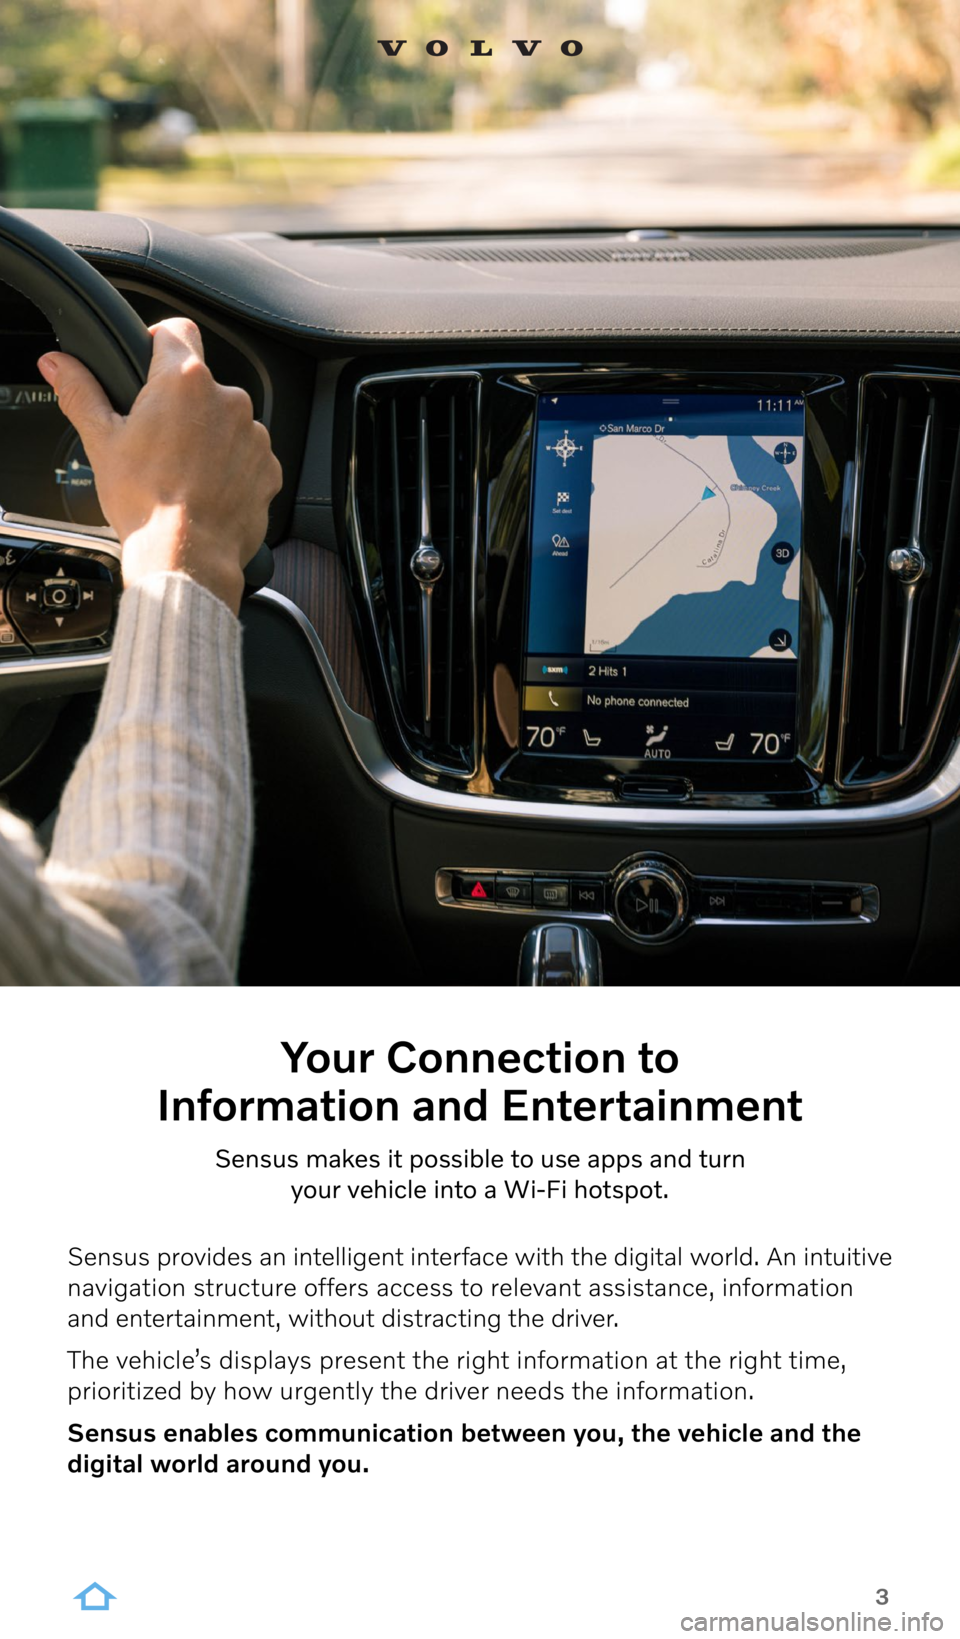 VOLVO S60 RECHARGE 2022  Sensus Digital Guide 3
Your Connection to  
Information and Entertainment
Sensus makes it possible to use apps and turn  
your vehicle into a Wi-Fi hotspot.
Sensus provides an intelligent interface with the digital world.